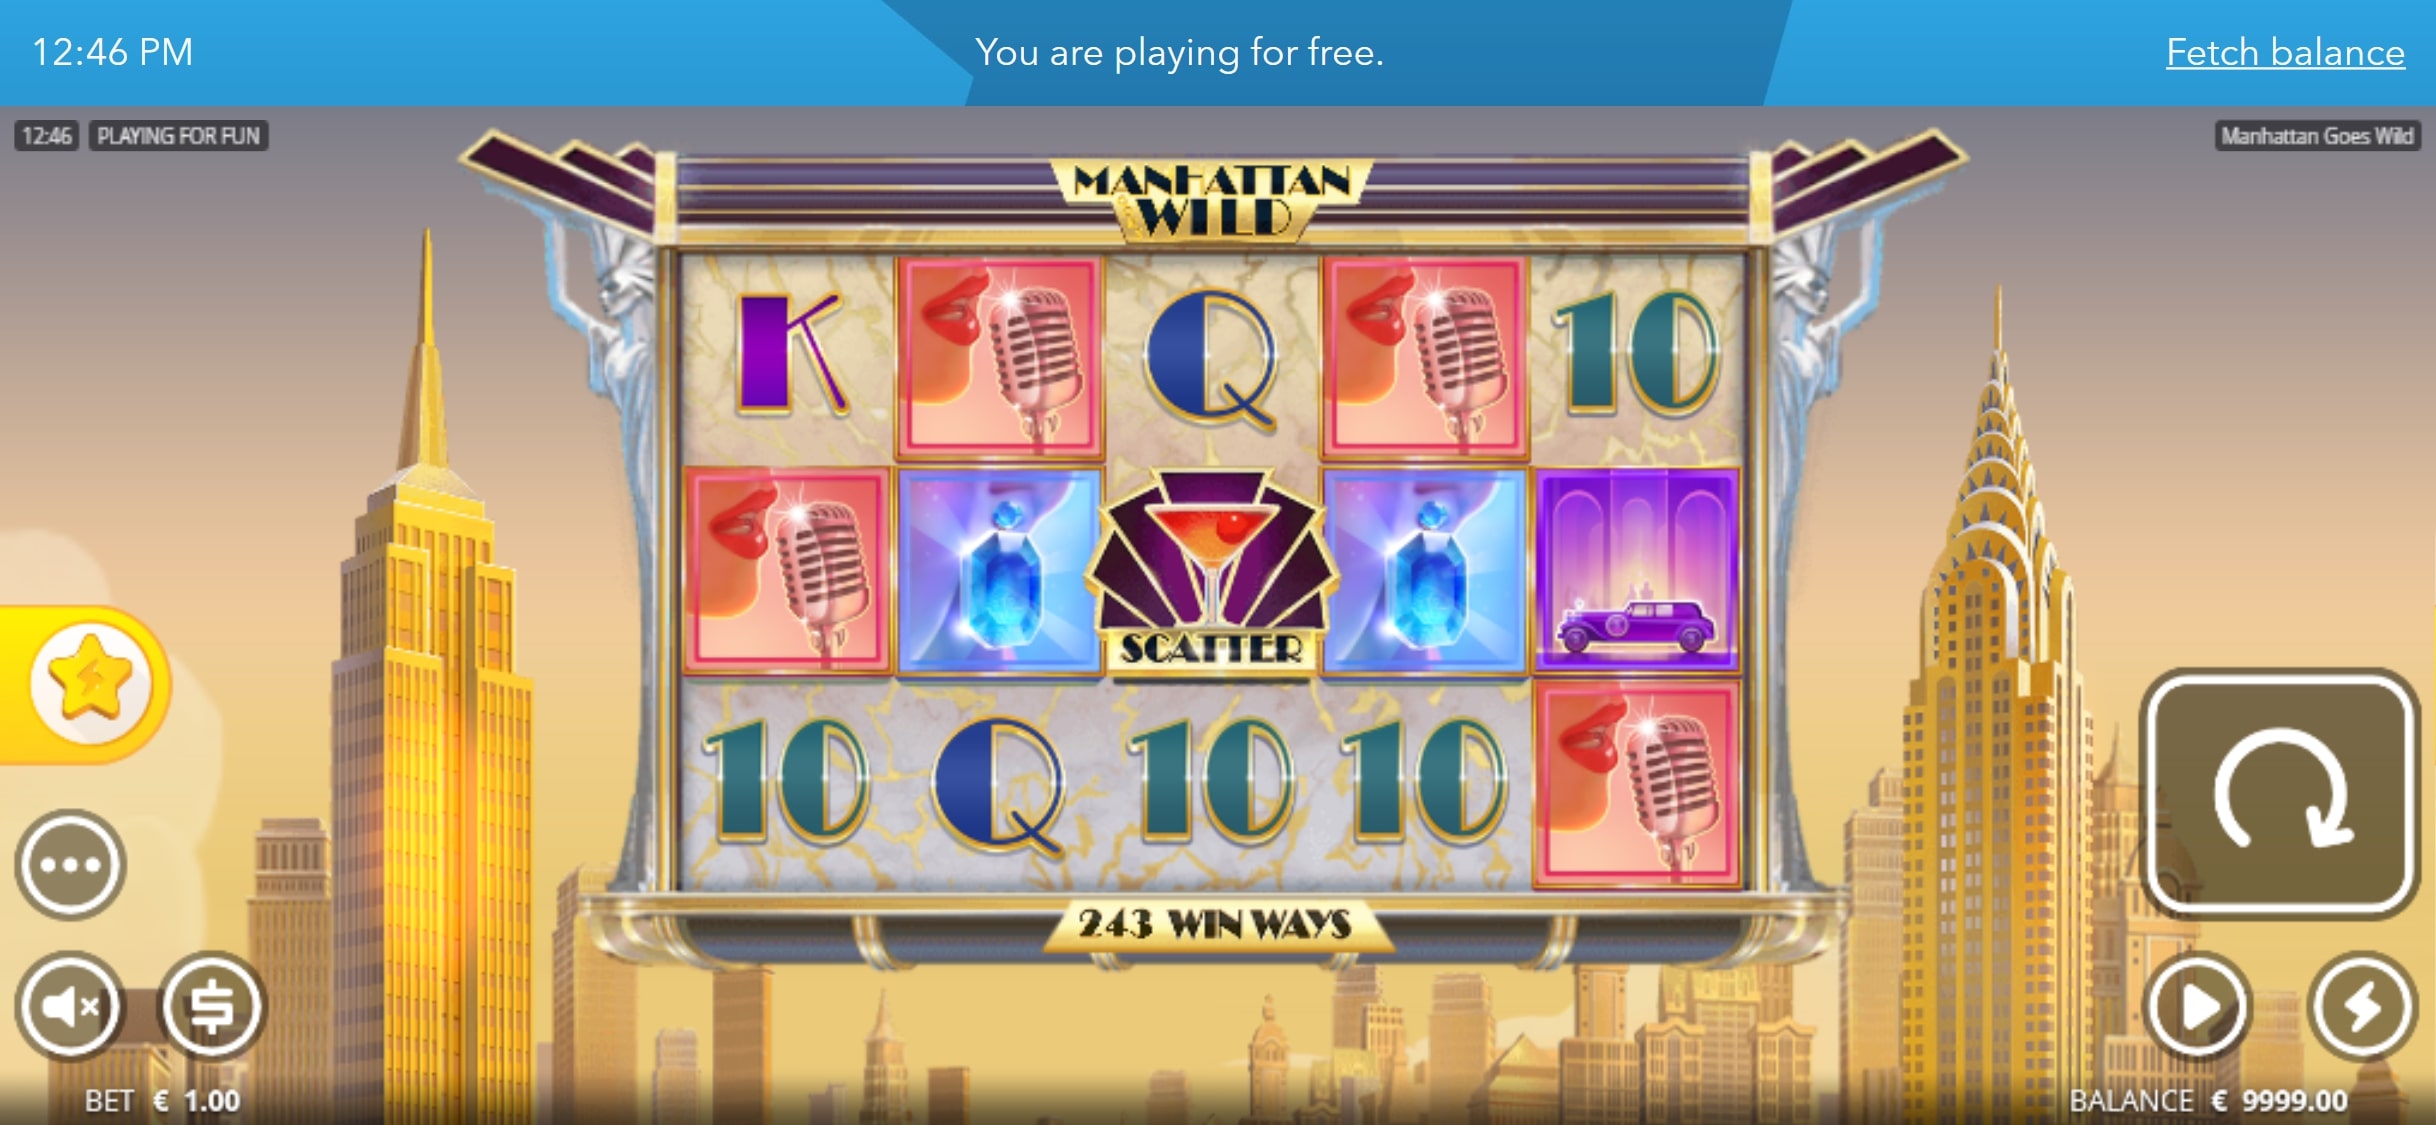 SuperNopea Casino Mobile Slot Games Review